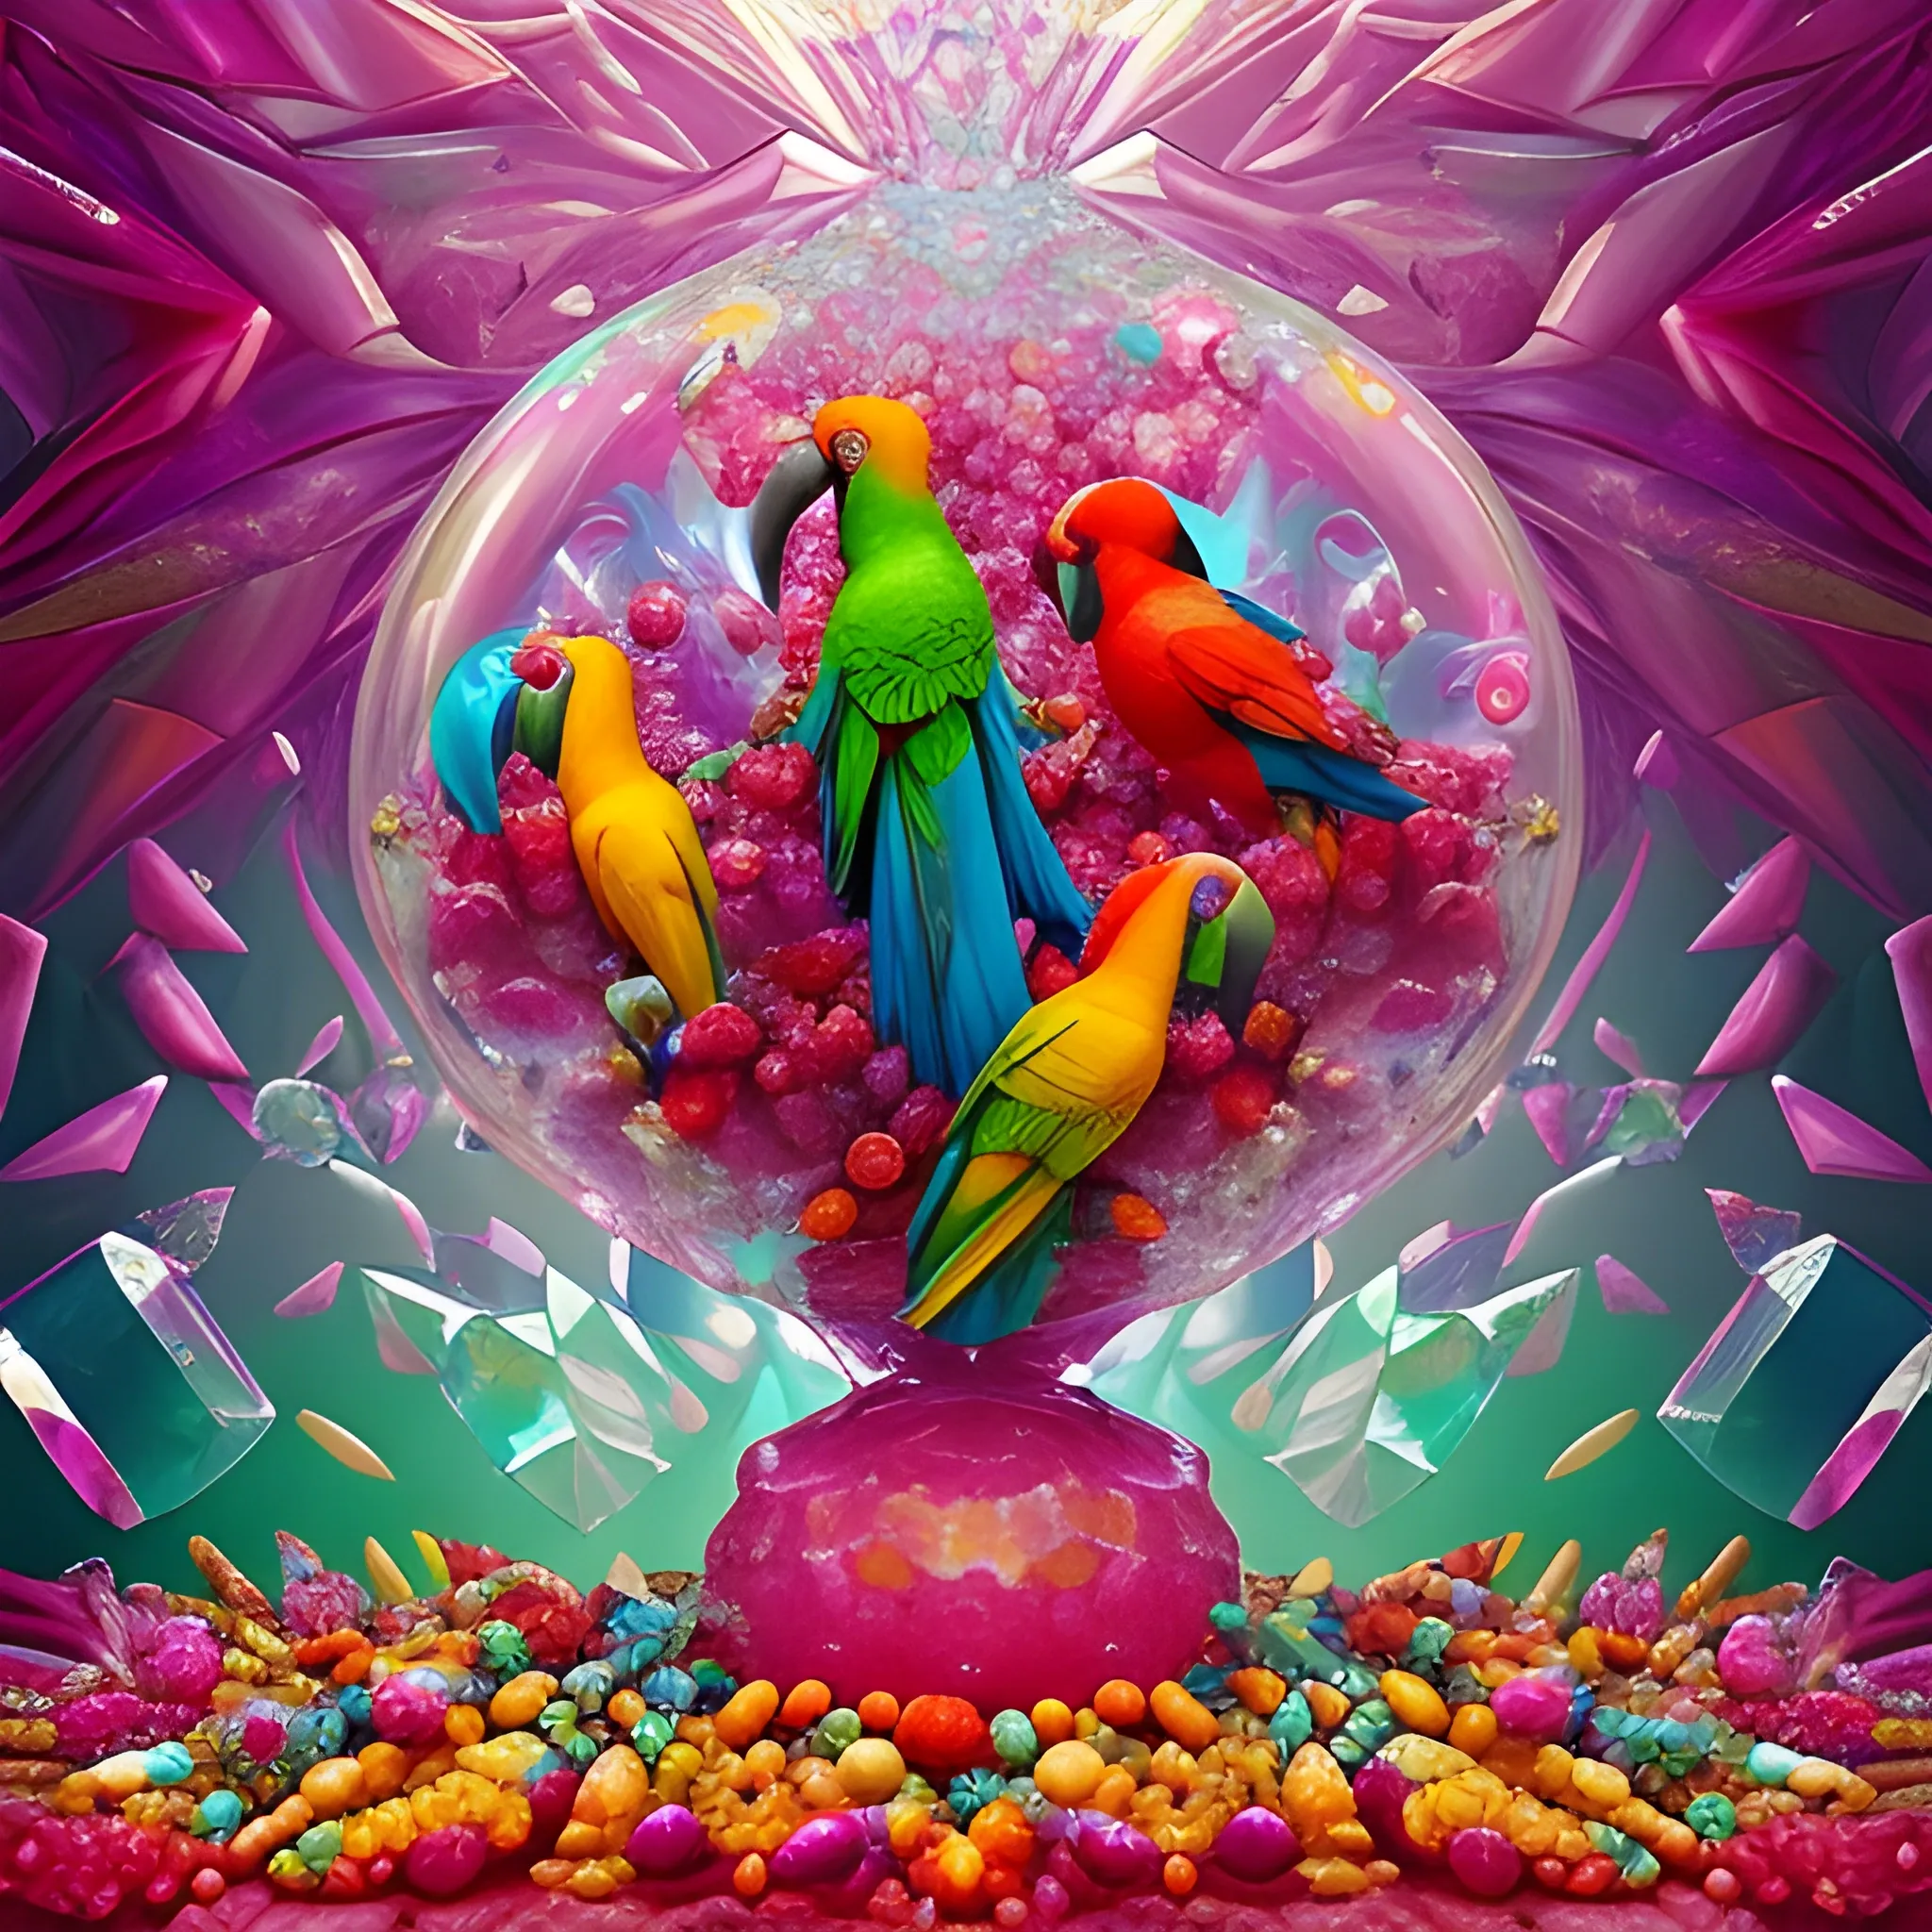 make a  sculpture of many crystal crazy raspberries with human face, crystal birds of paradise and  parrots around, many ice cubes  in the air, many plans of Amazon Rainforest, saturated colors, surrealism, chaotic background, 3D, Trippy,  eerie atmosphere, close up, Oil Painting, wide dynamic range, wide-angle view  